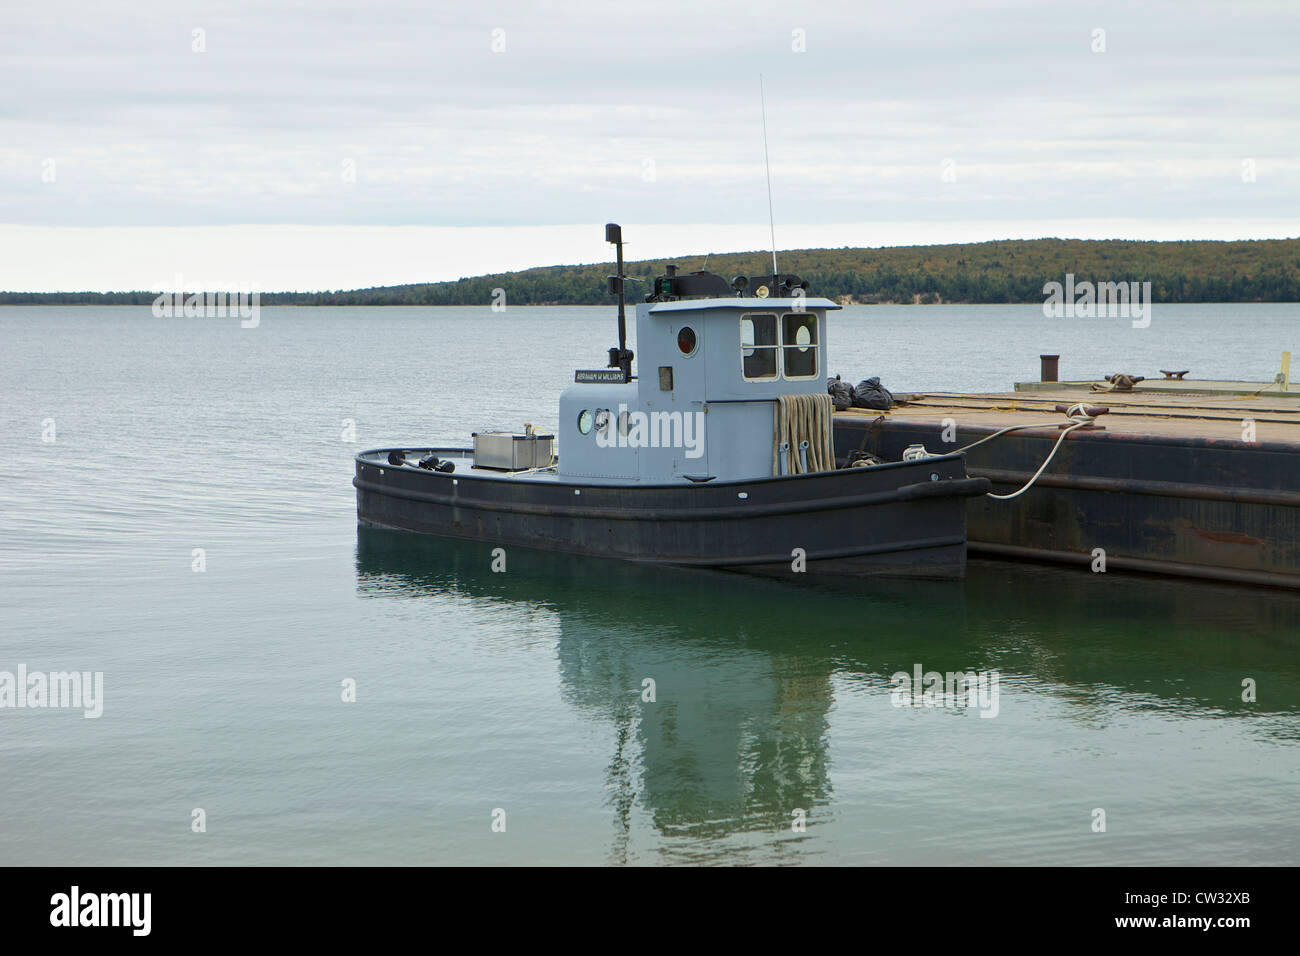 The U.S. Forest Service boat Abraham M. Williams at dock in Munising, Michigan Stock Photo